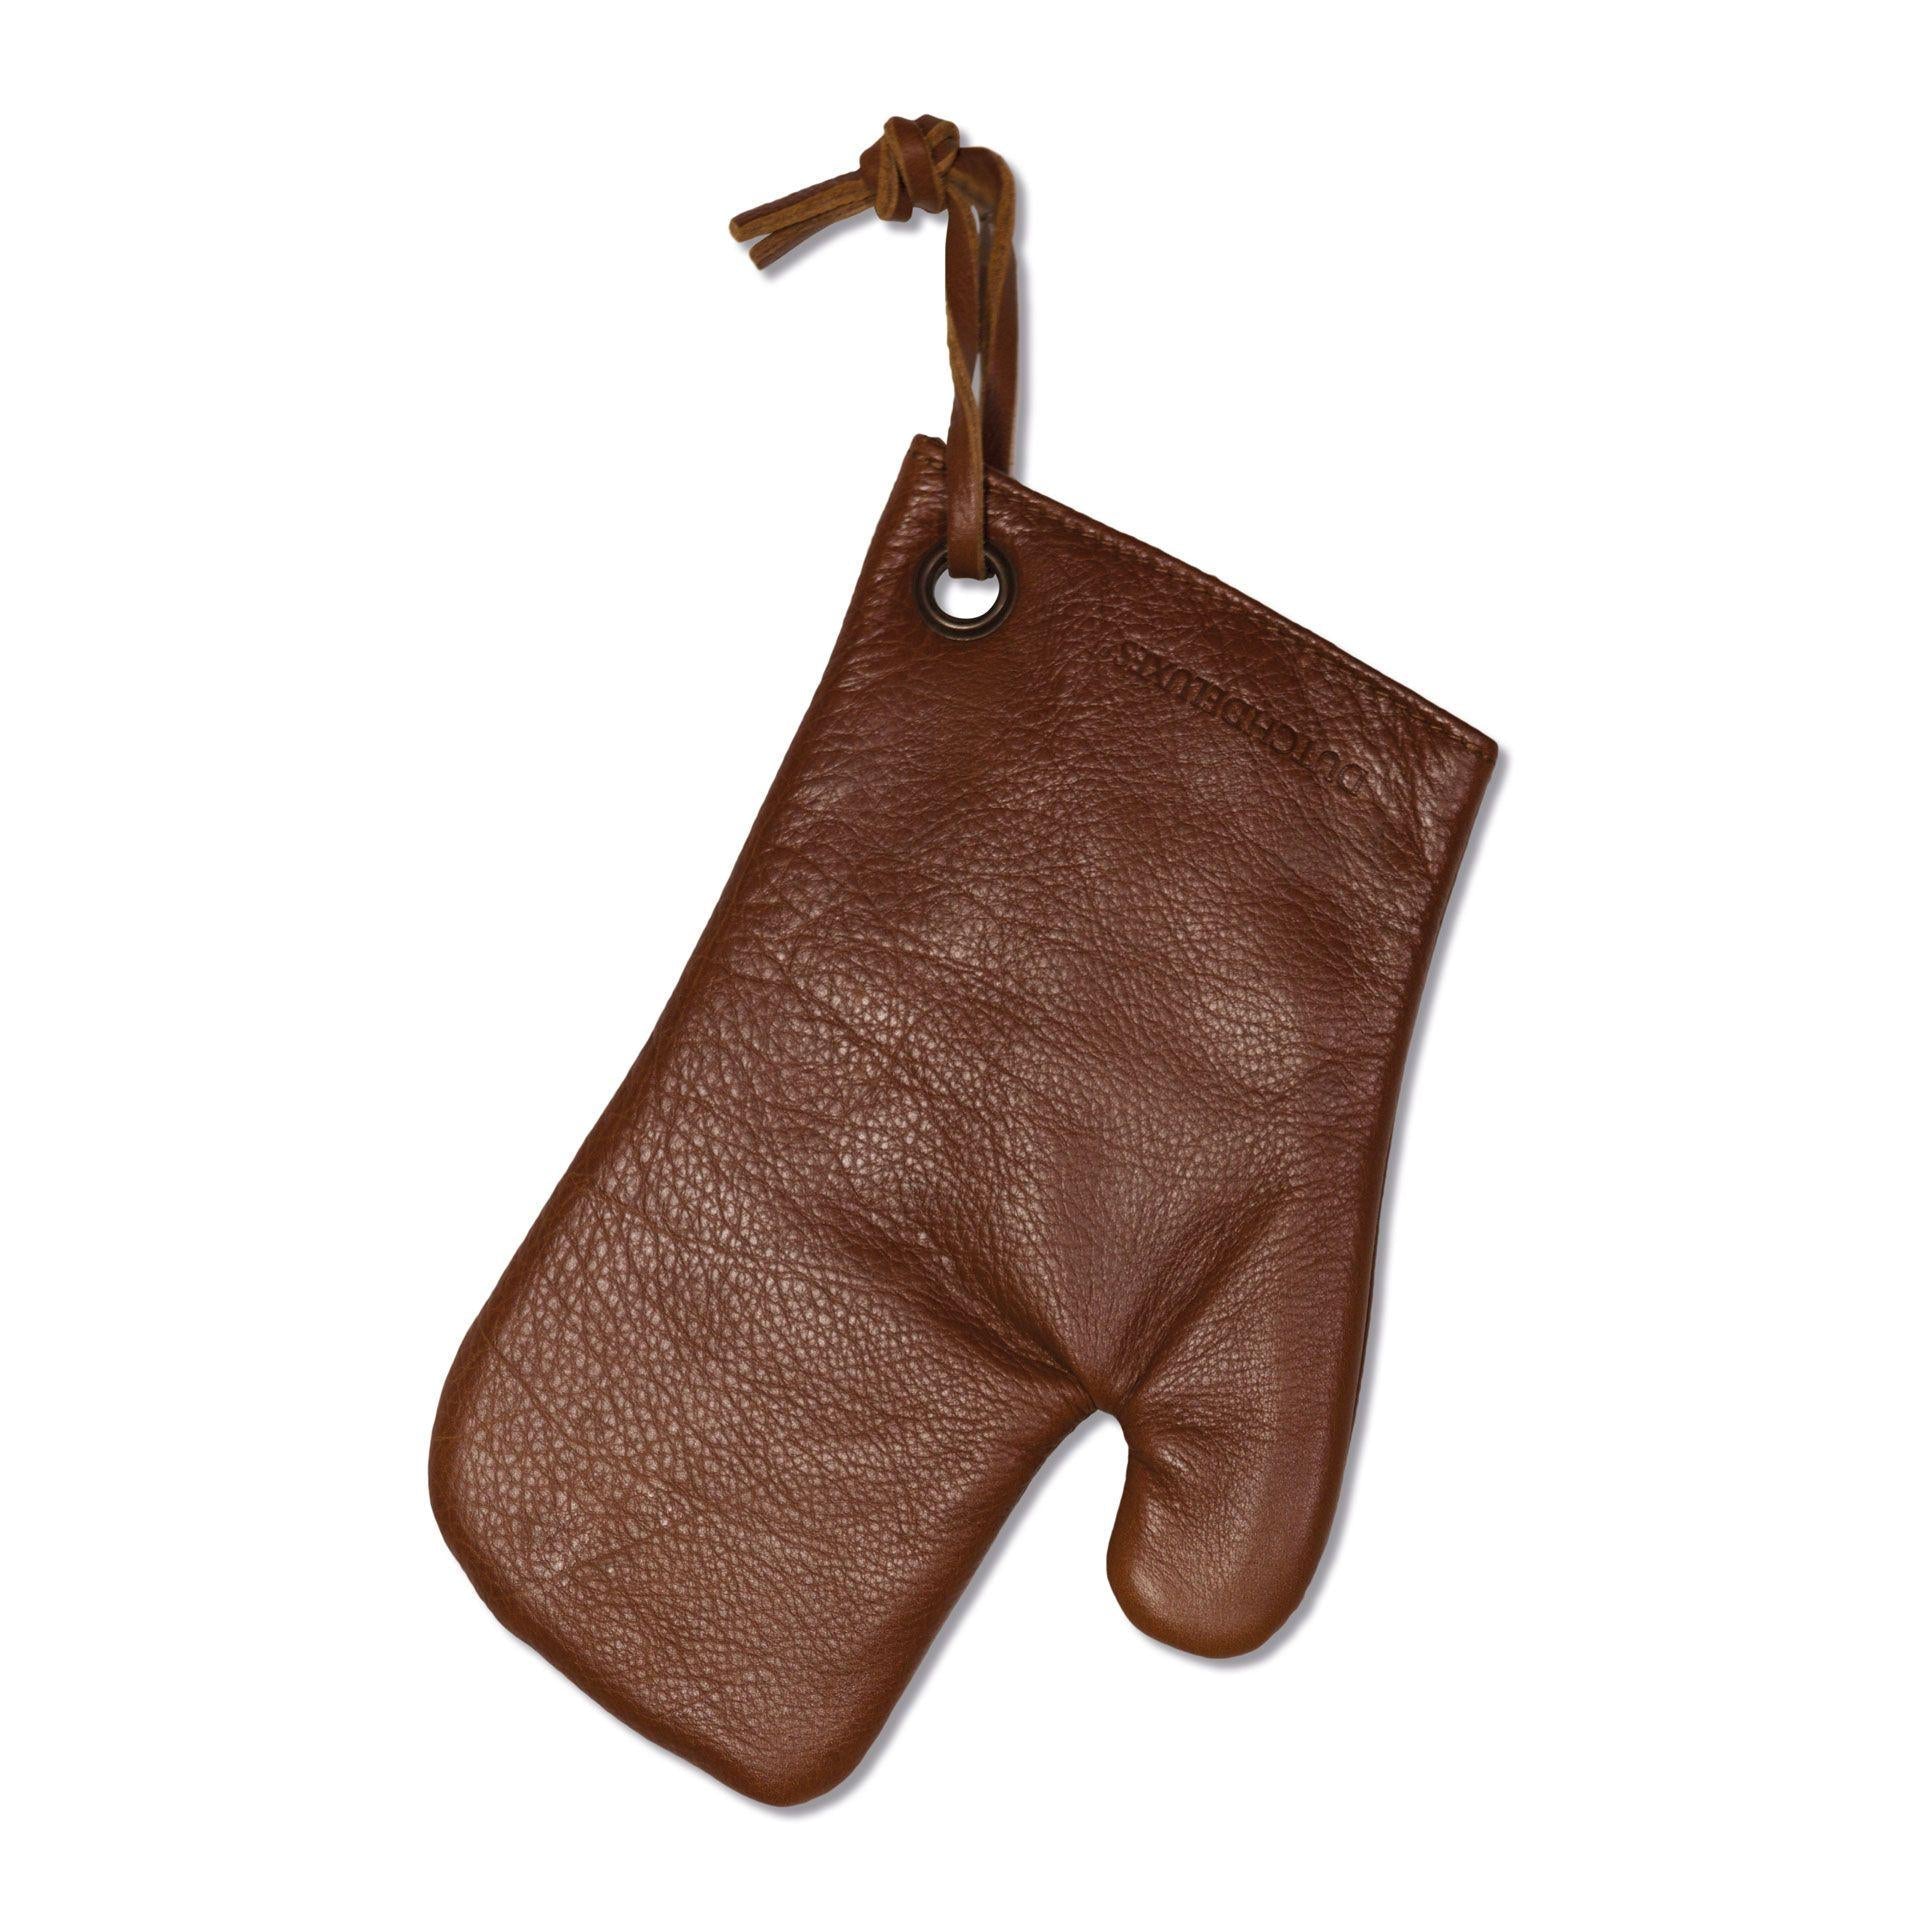 Dutchdeluxes Classic Barbecue & Oven Glove, Brown